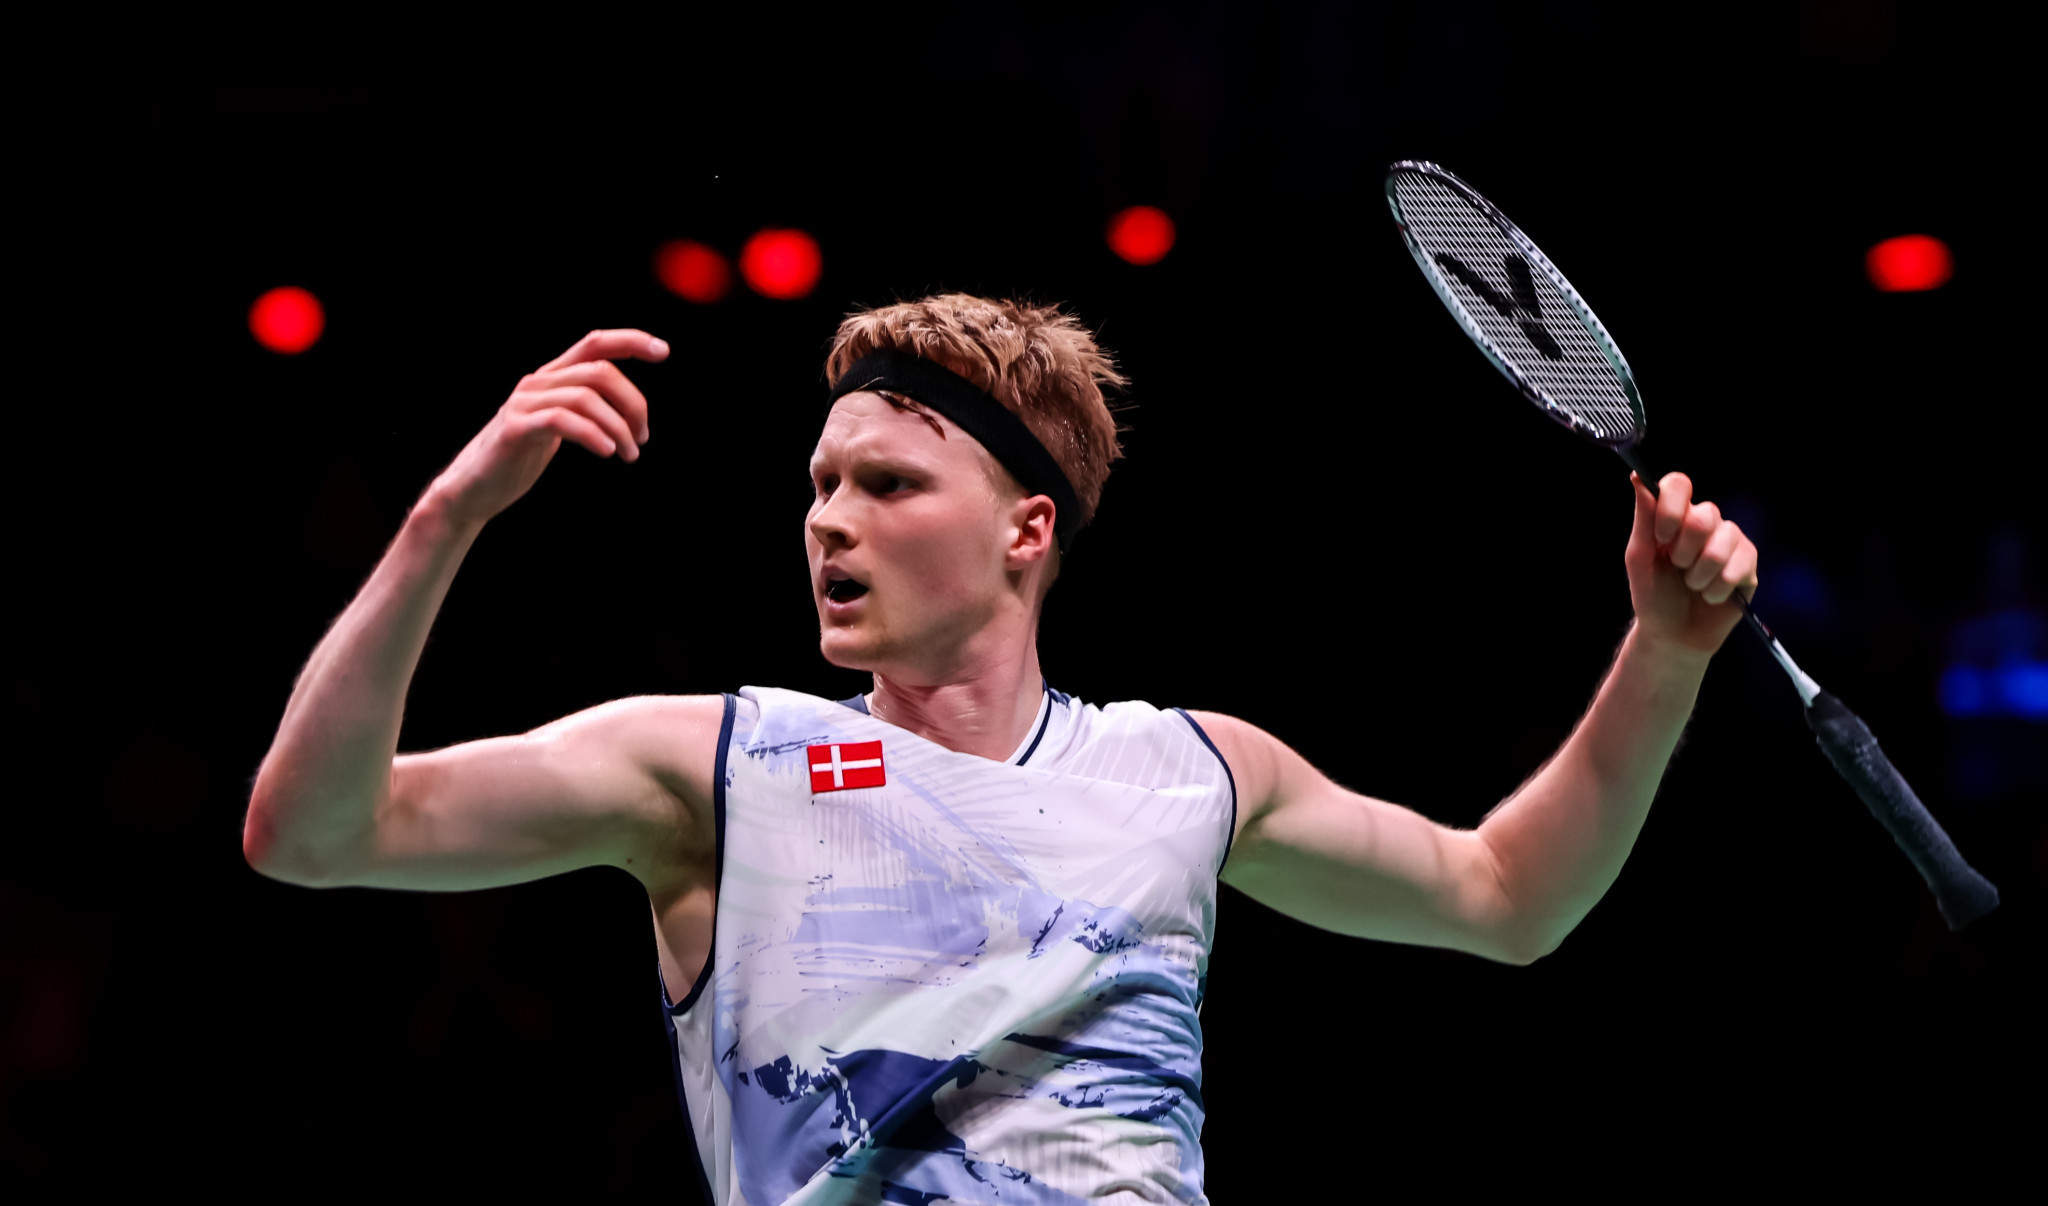 Danish star Anders Antonsen won the final match of a busy day to complete the men's singles quarter-final line-up ©Badmintonphoto